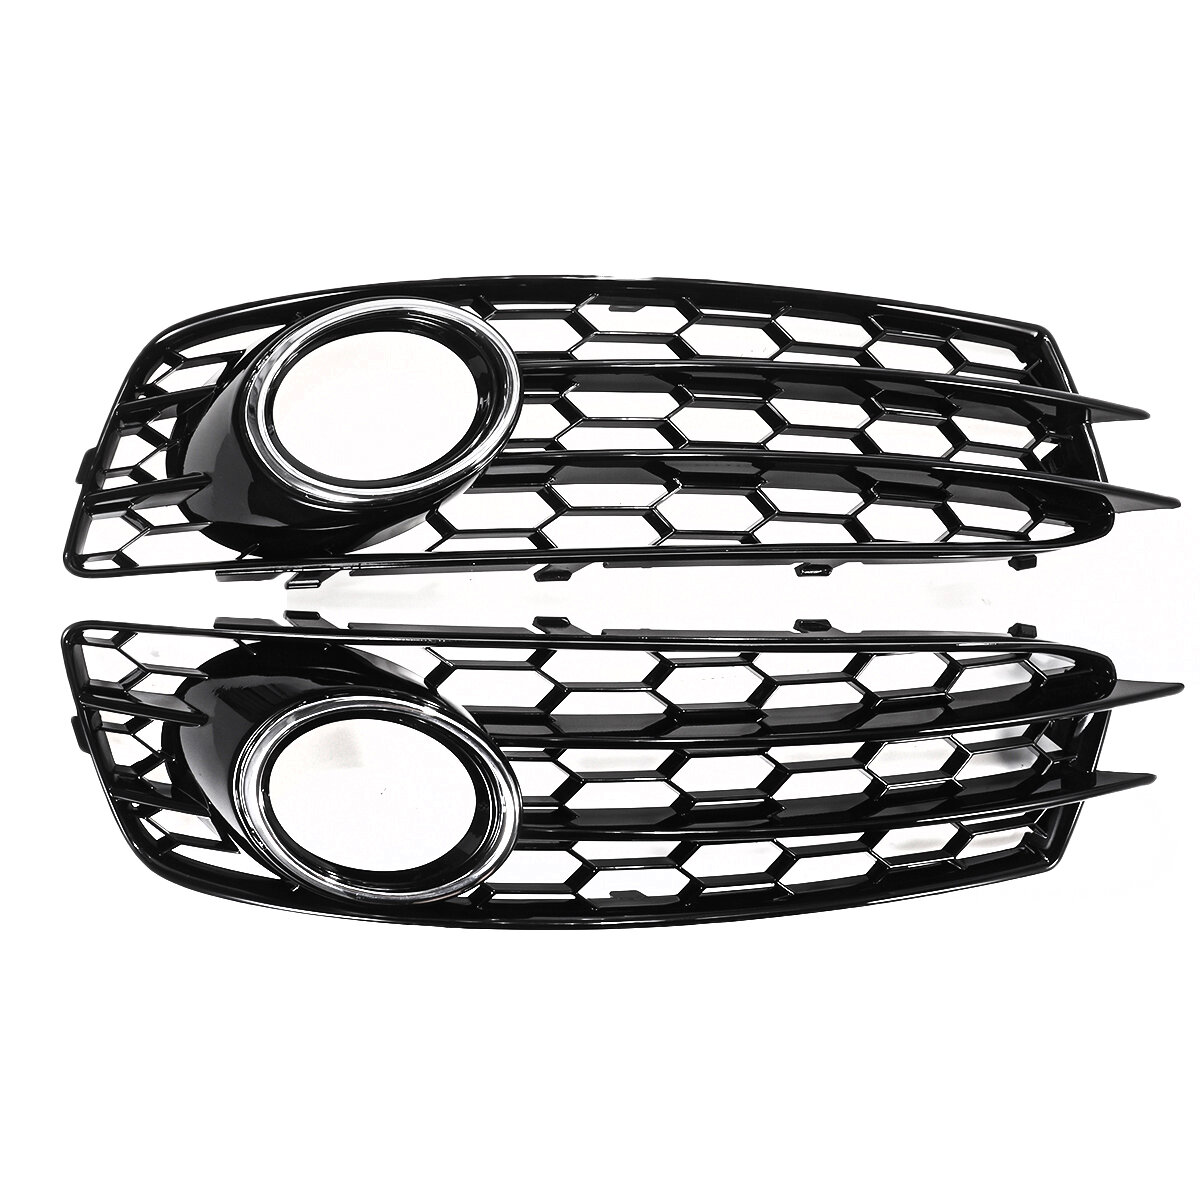 Front Fog Light Lamp Grille Grill Cover Honeycomb HexChrome Silver For Audi A3 8P S-Line 2009-2012